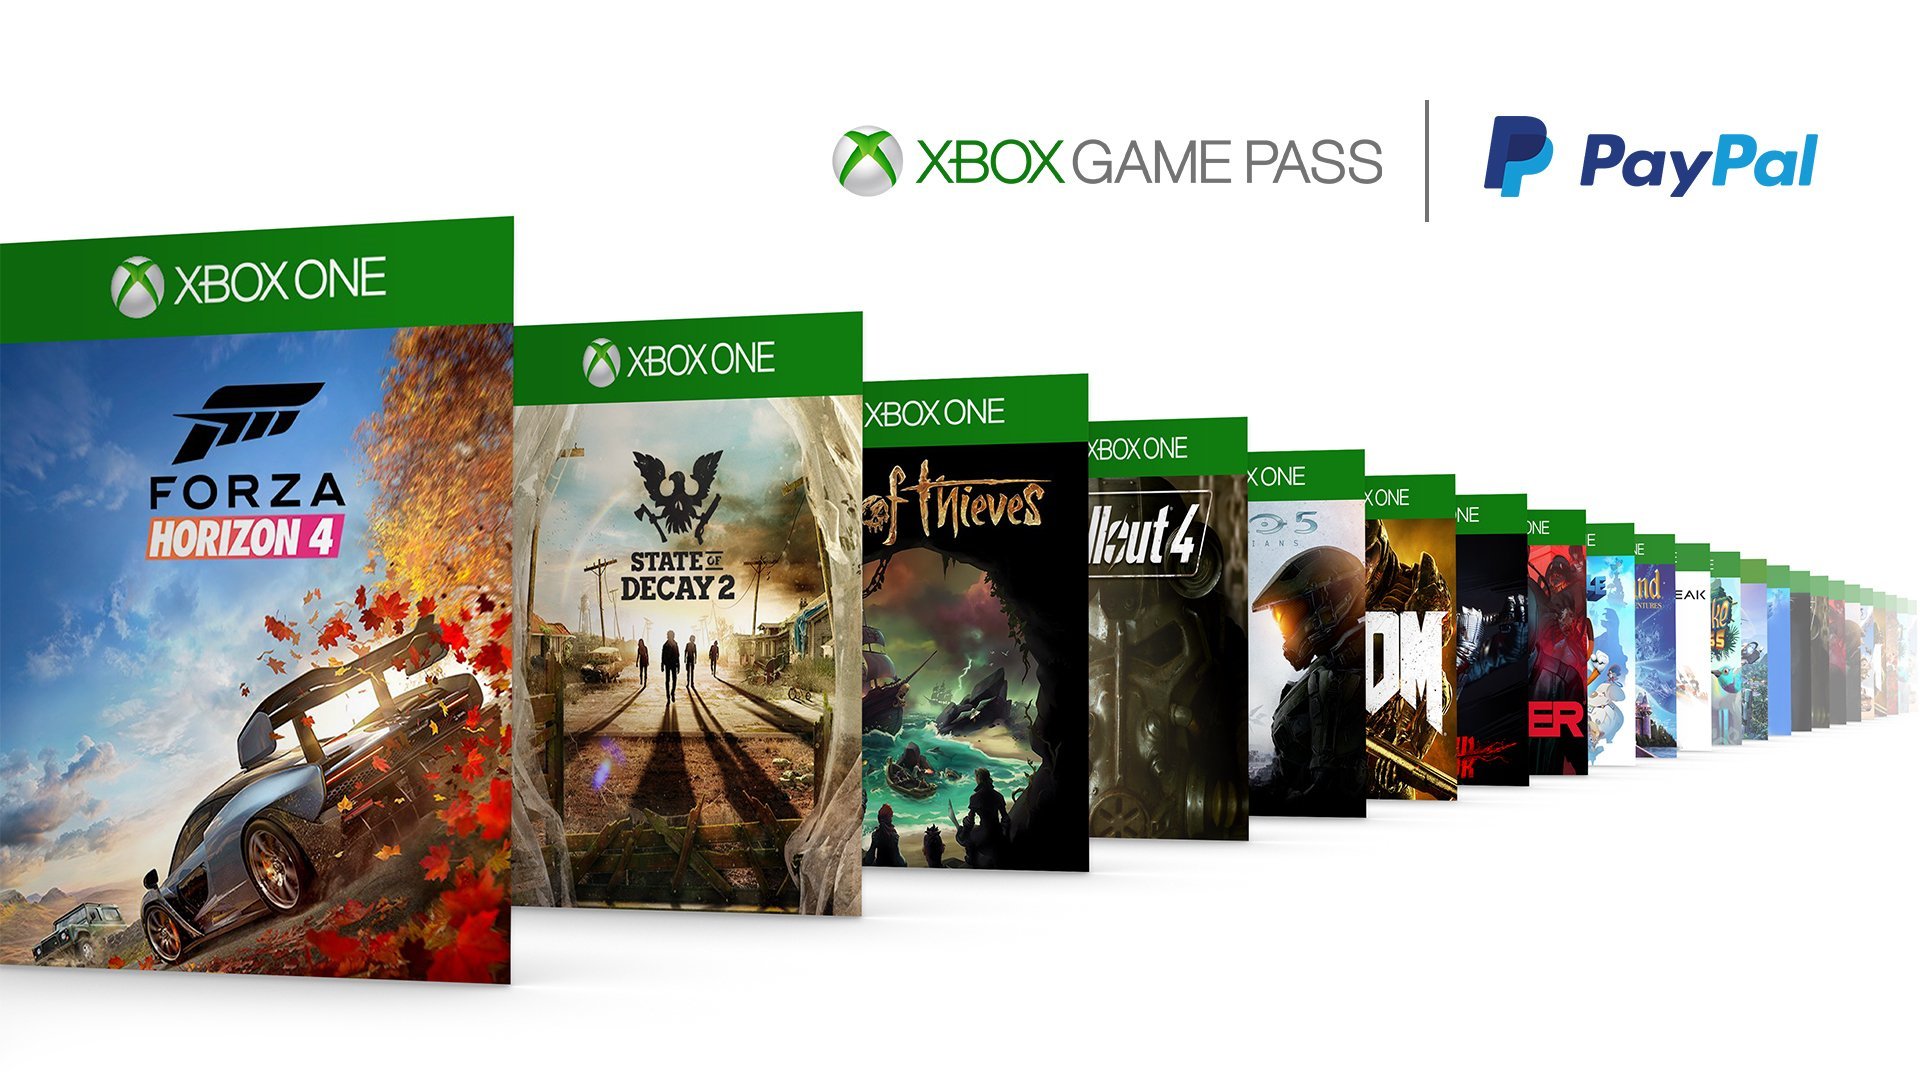 Snag a free month of Xbox Game Pass when you buy one with PayPal